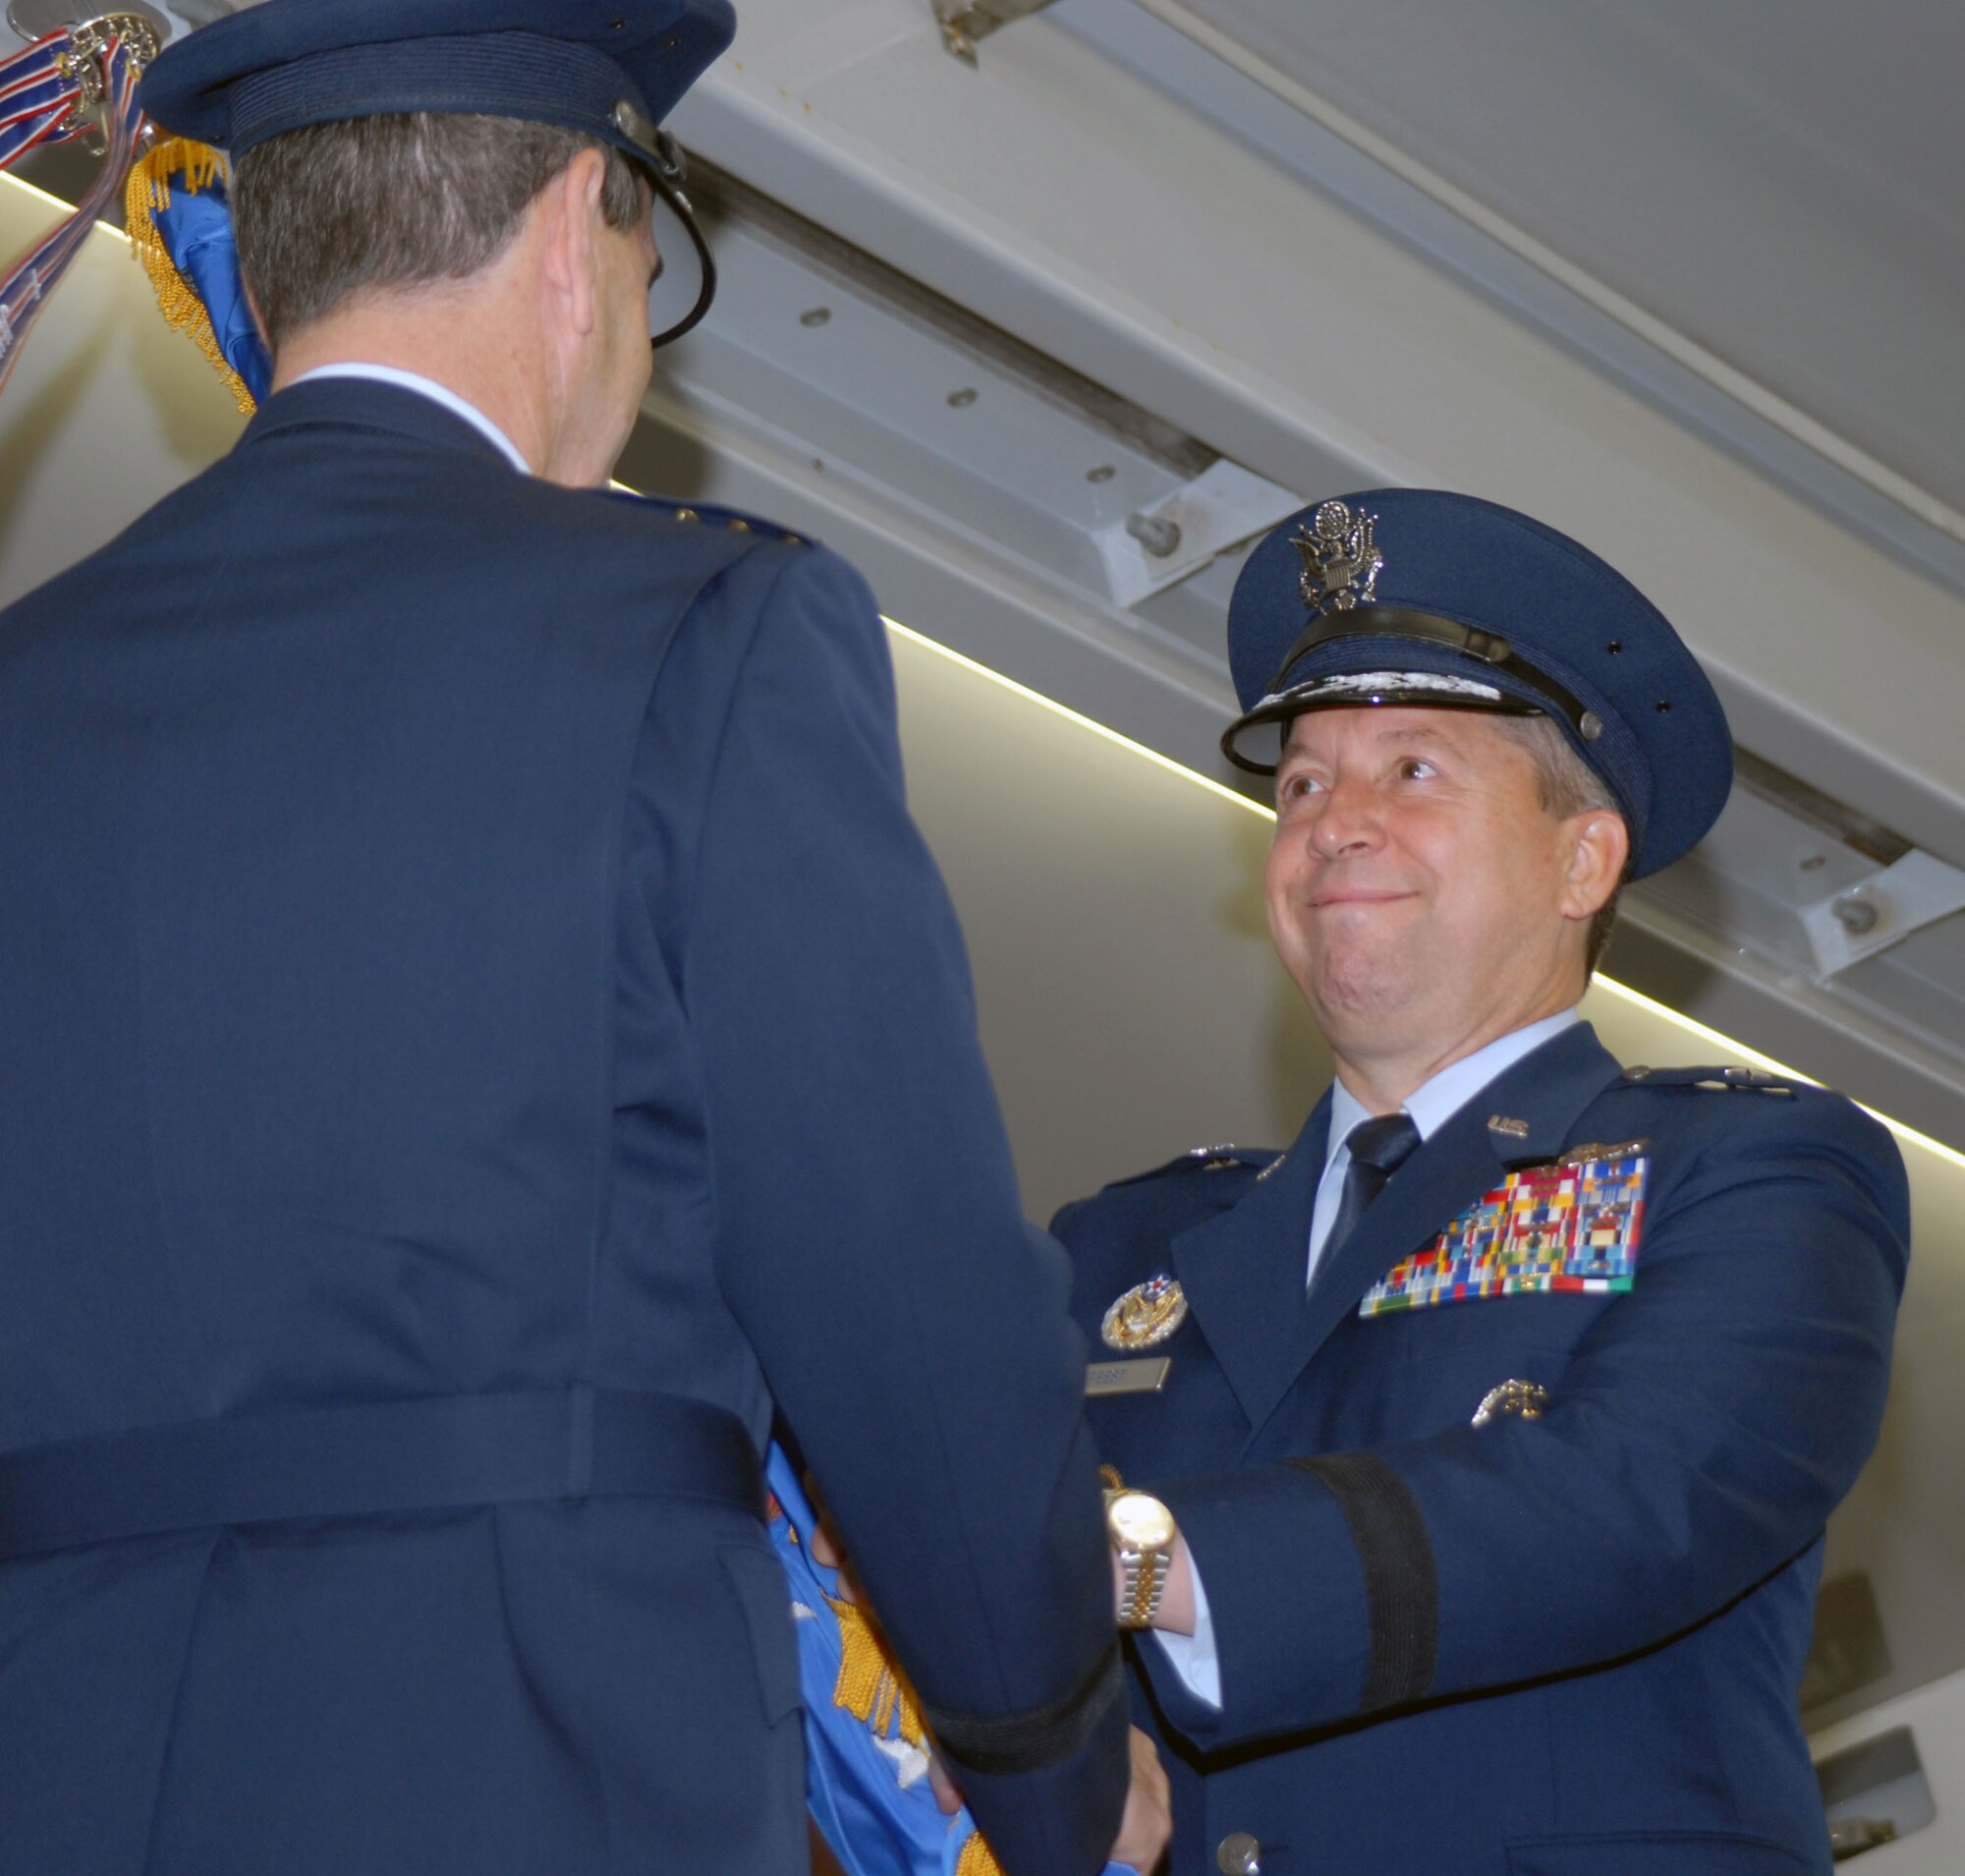 Brig. Gen. Gregory Feest takes command of 19th Air Force from Gen. Stephen Lorenz, Air Education and Training Command commander, during a change of command ceremony July 30 in Hangar 4 at Randolph Air Force Base, Texas. (U.S. Air Force photo by Rich McFadden)